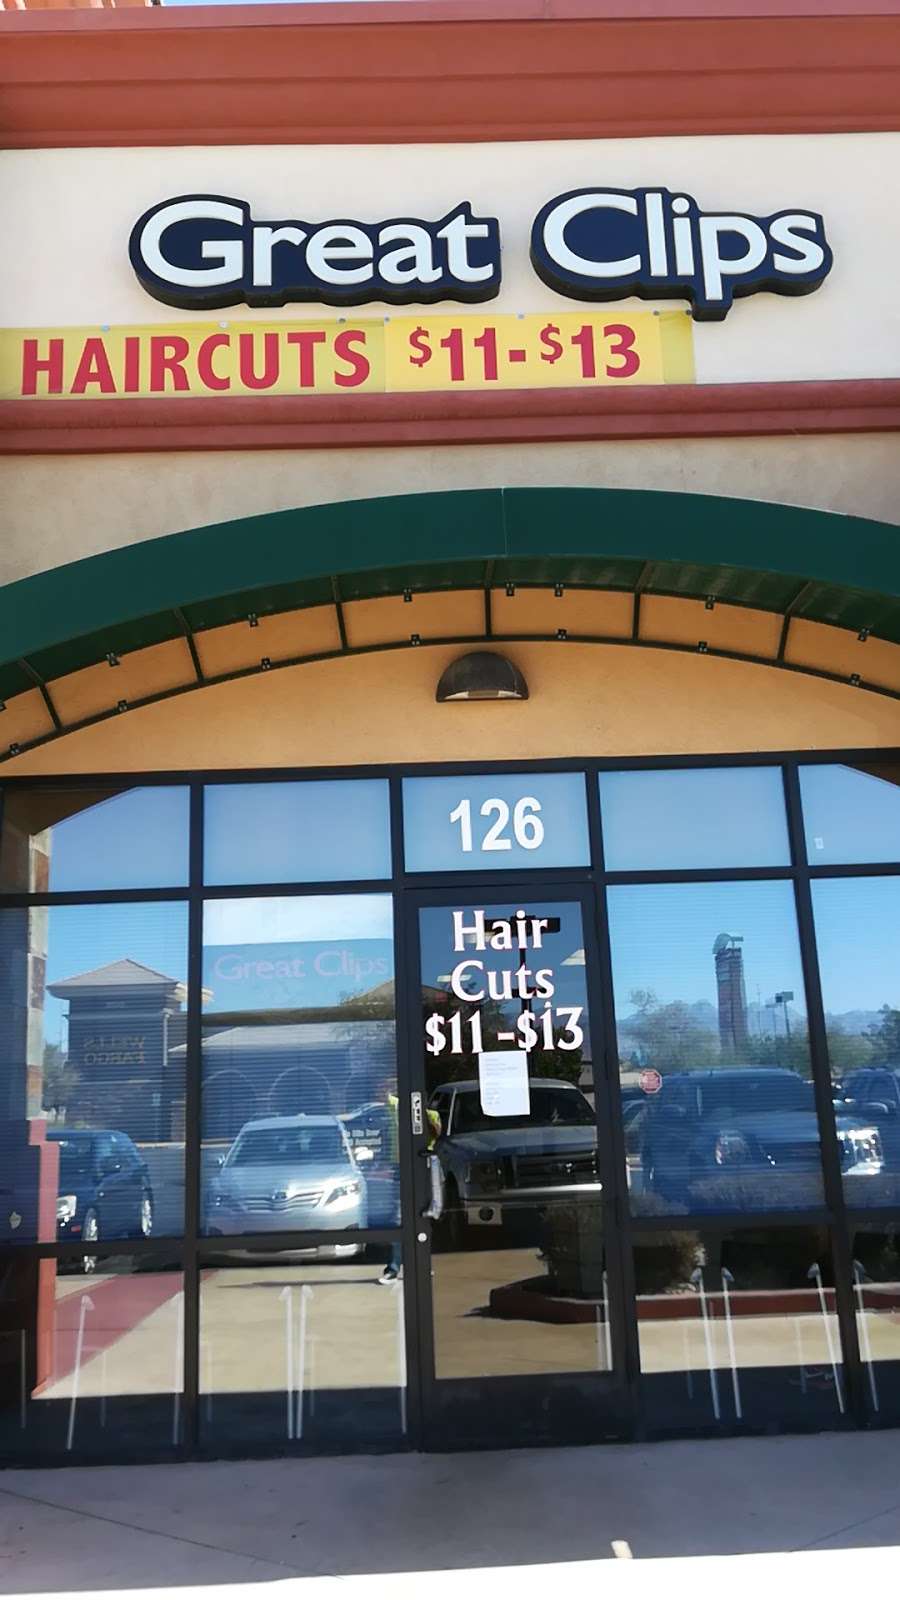 Great Clips | 5960 Losee Rd, Ste 126, North Las Vegas, NV 89081 | Phone: (702) 220-7701